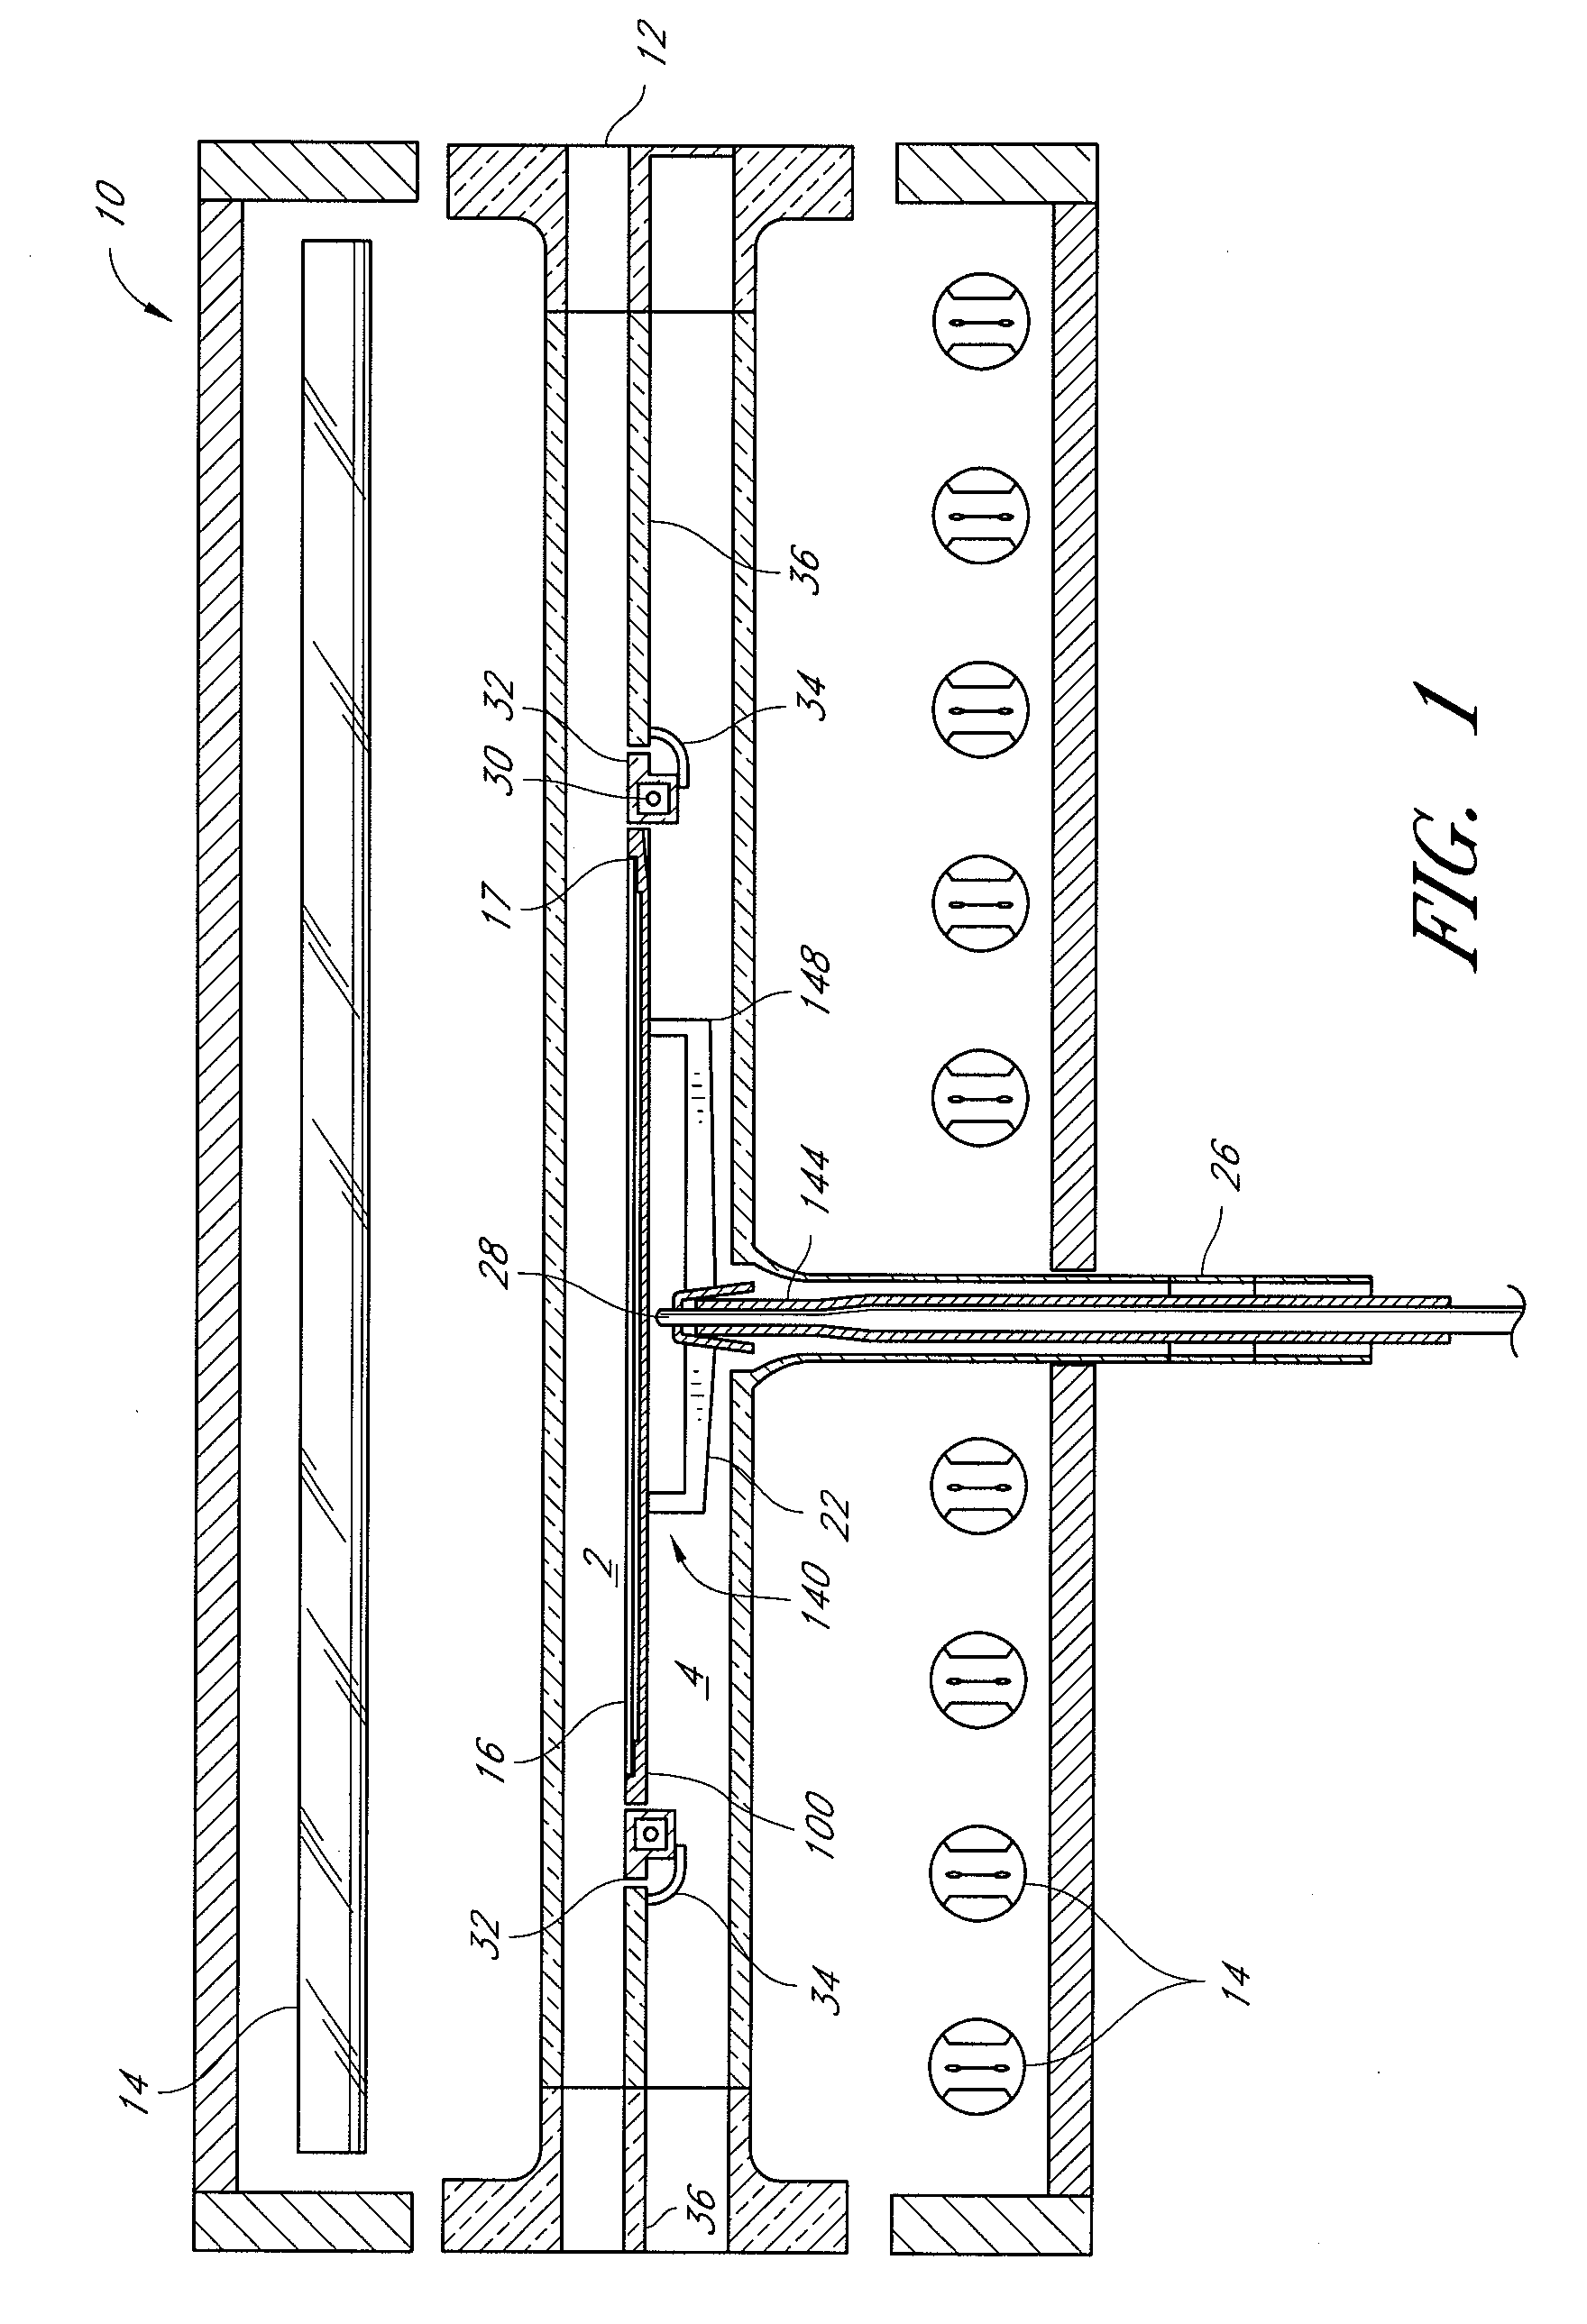 Porous substrate holder with thinned portions